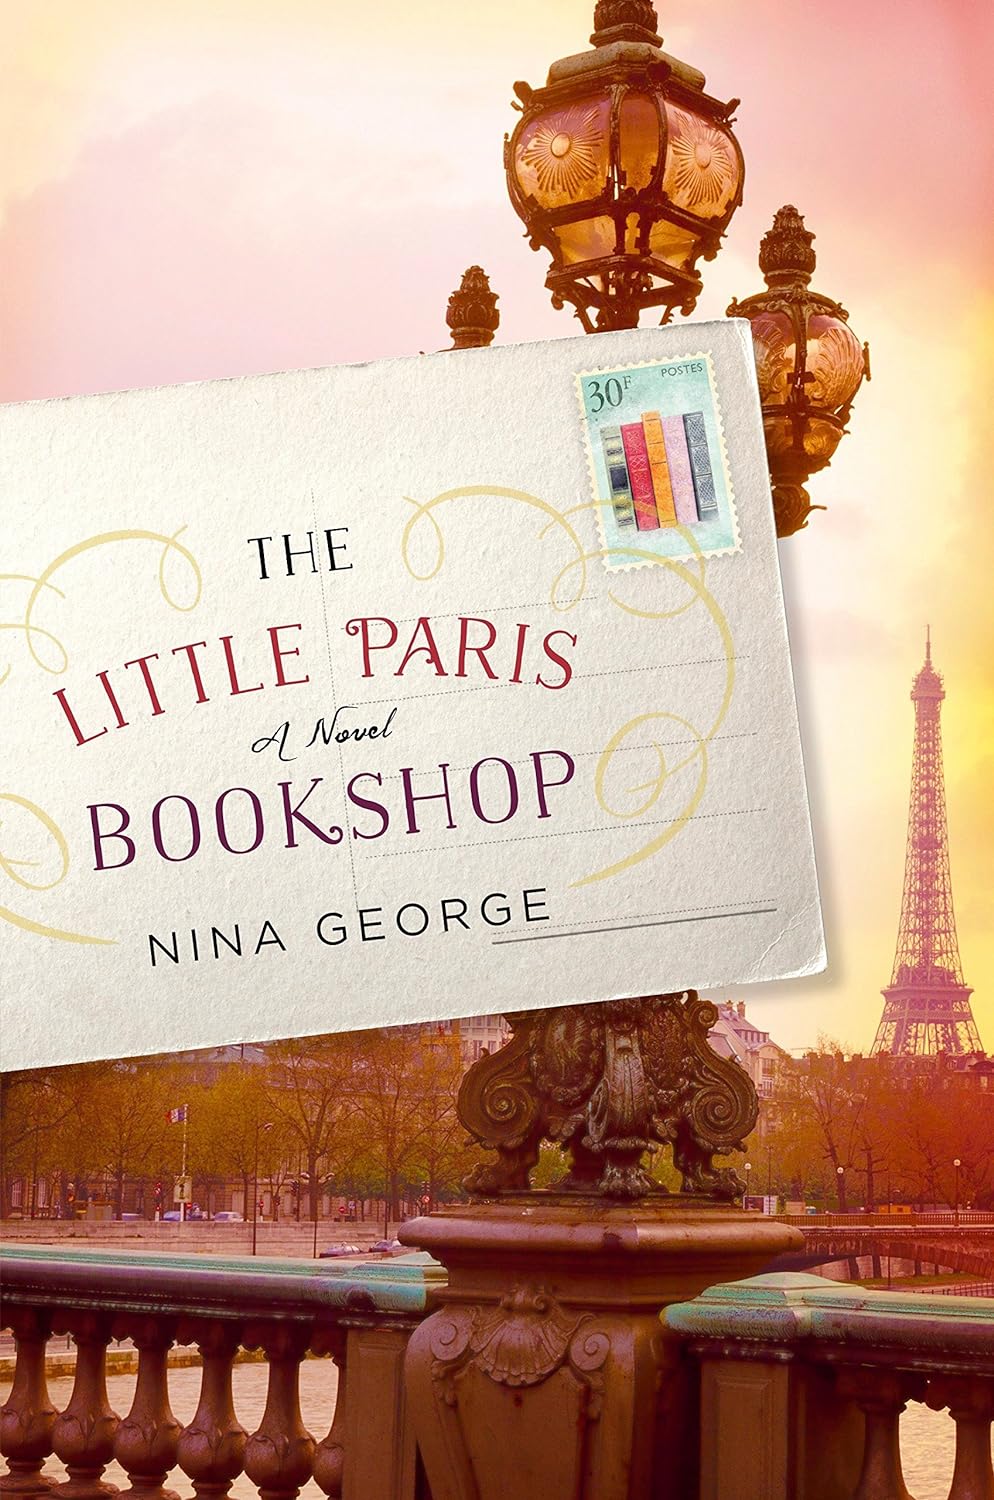 Cover image reads "The Little Paris Bookshop" by Nina George